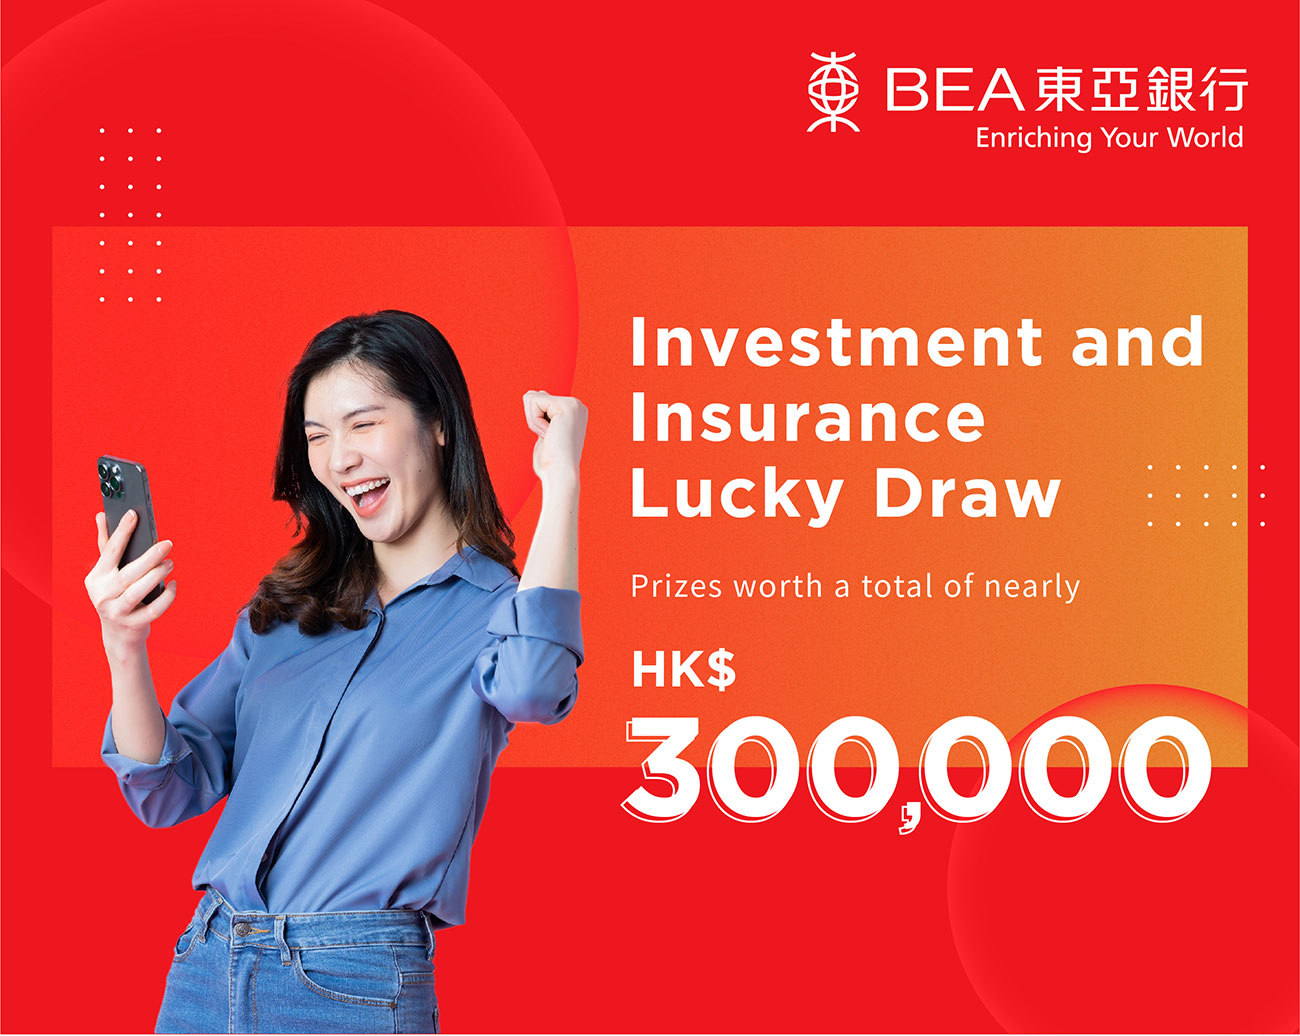 「Investment and Insurance」Lucky Draw